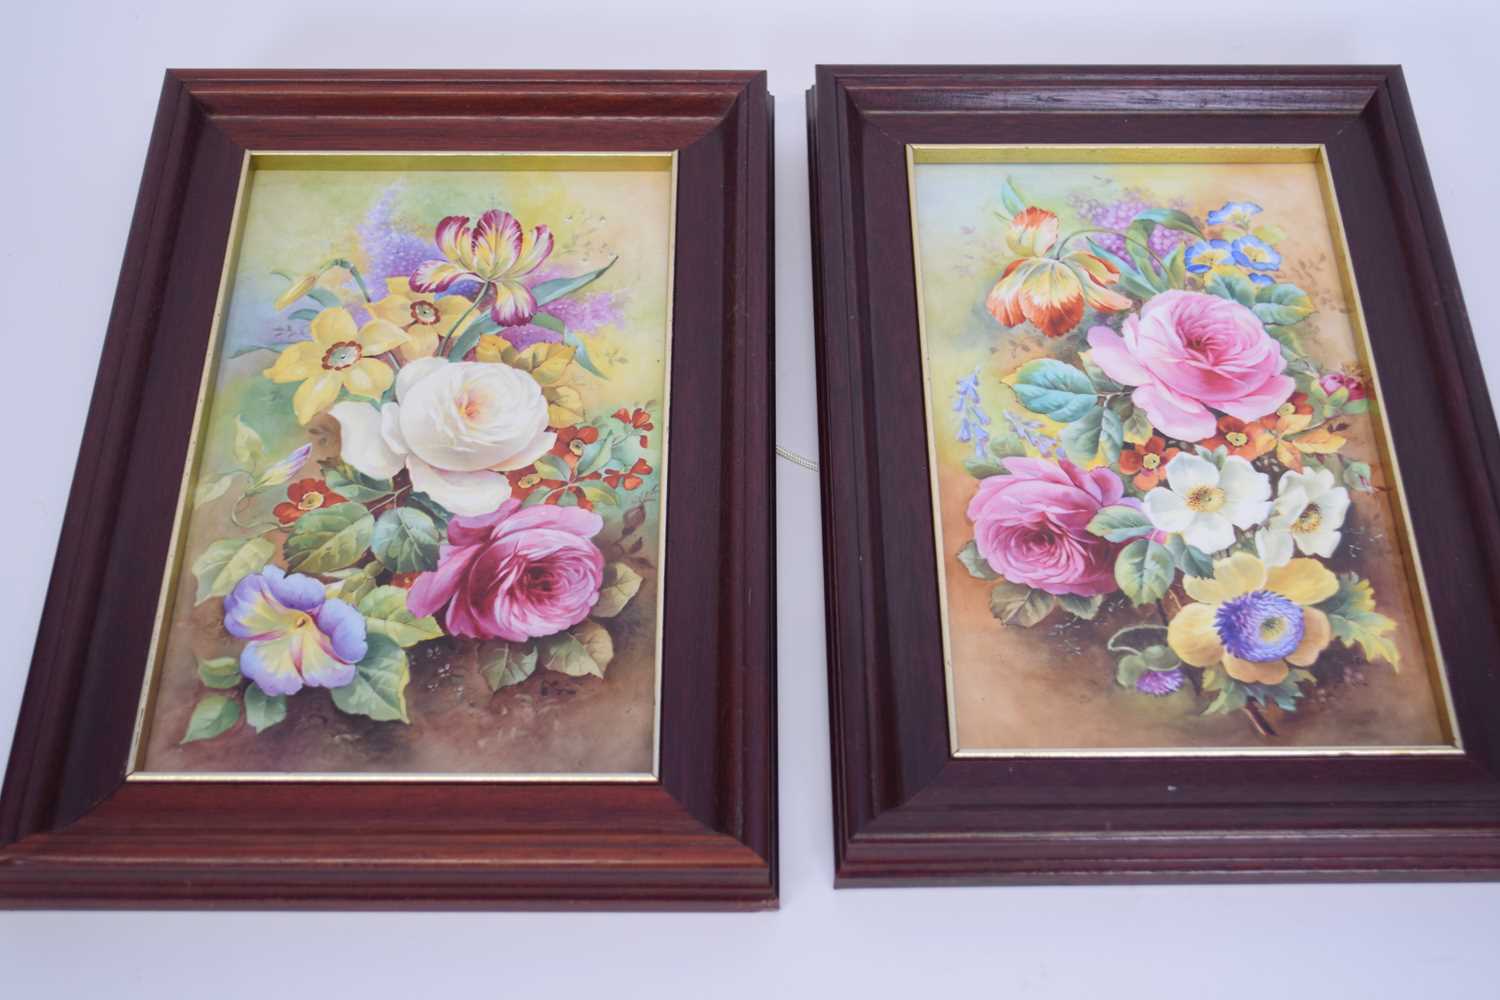 Pair of framed porcelain plaques painted with floral sprays, possibly by A Holland, Wedgwood and